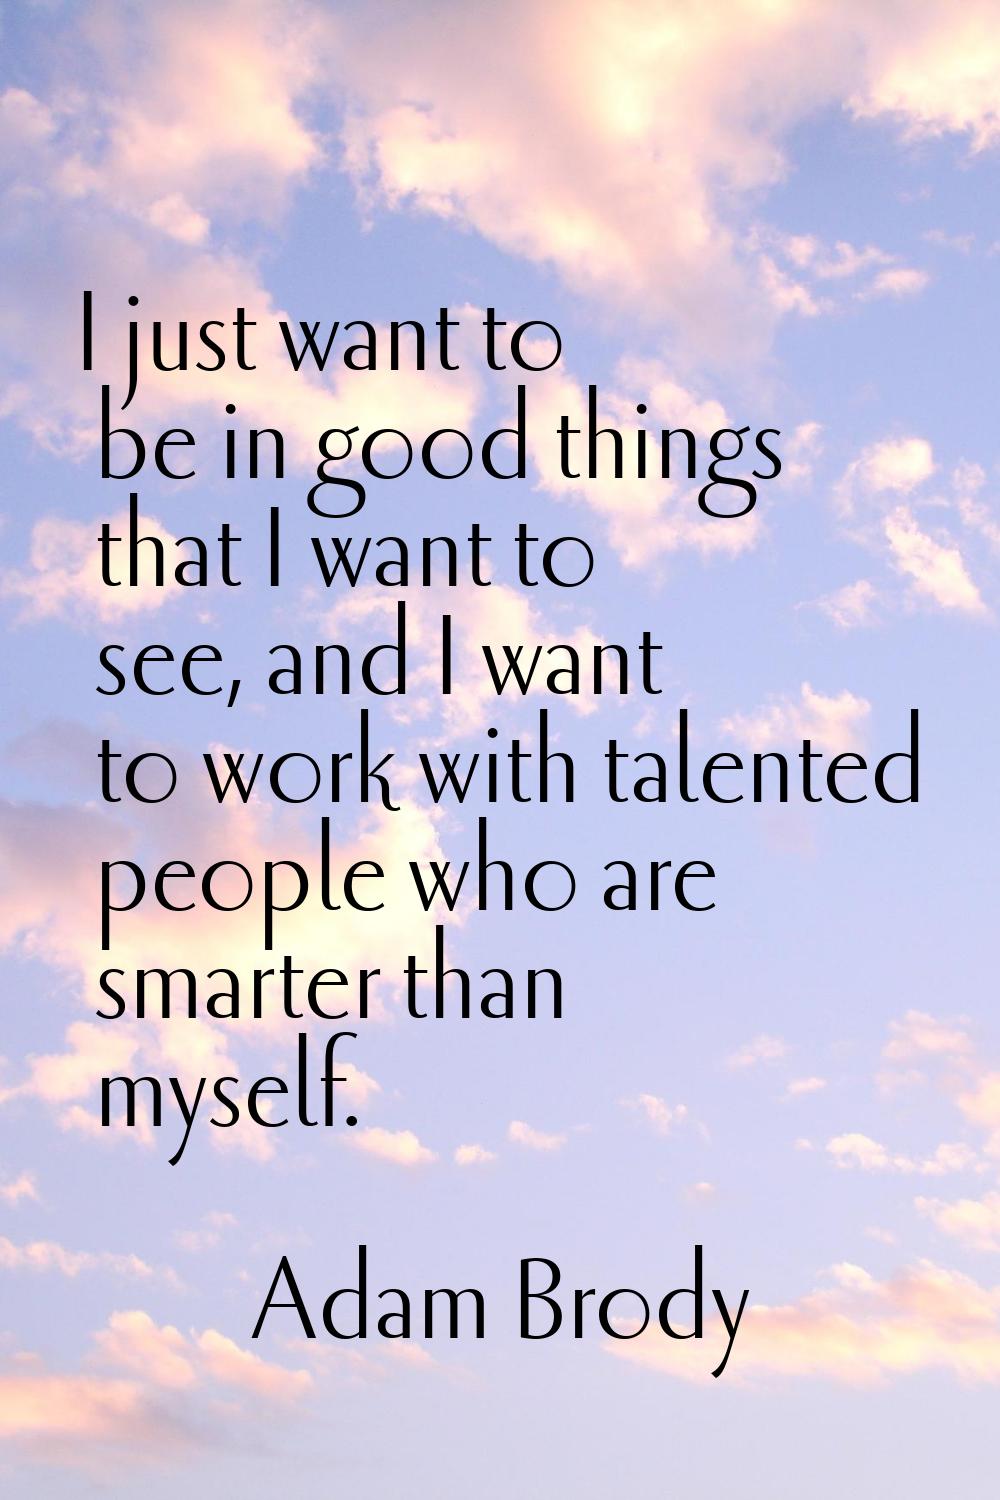 I just want to be in good things that I want to see, and I want to work with talented people who ar